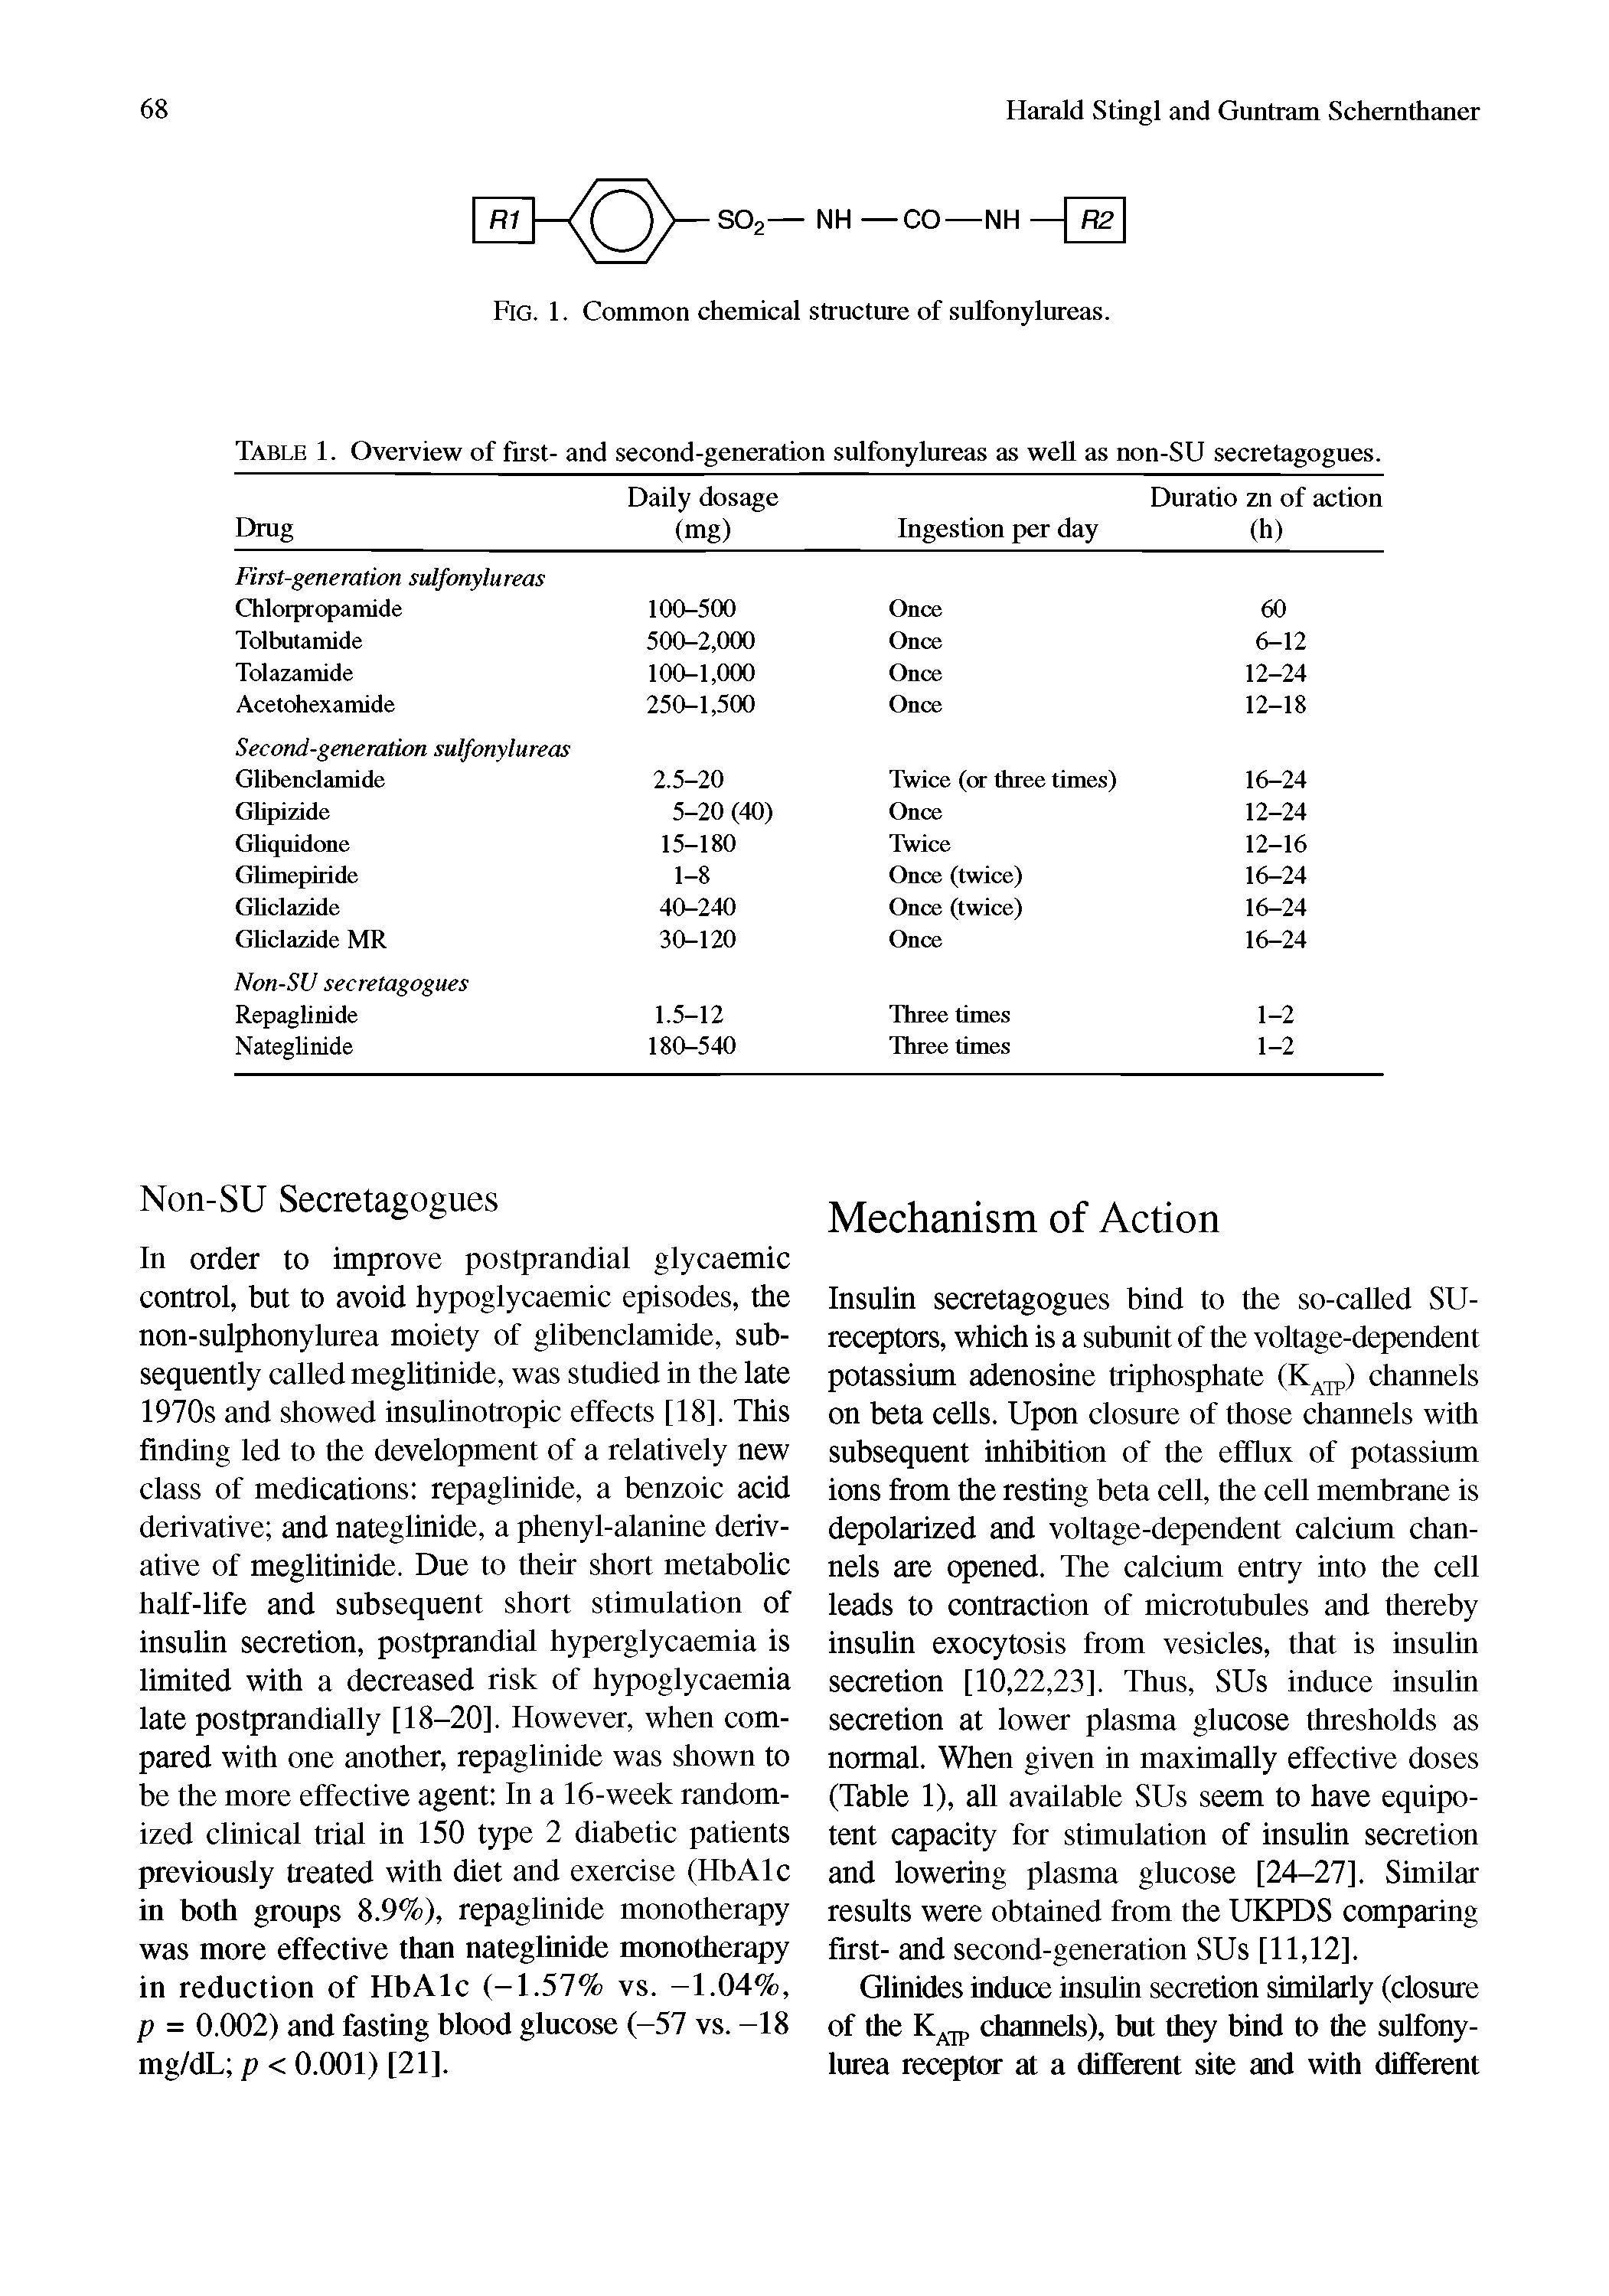 Table 1. Overview of first- and second-generation sulfonylureas as well as non-SU secretagogues.